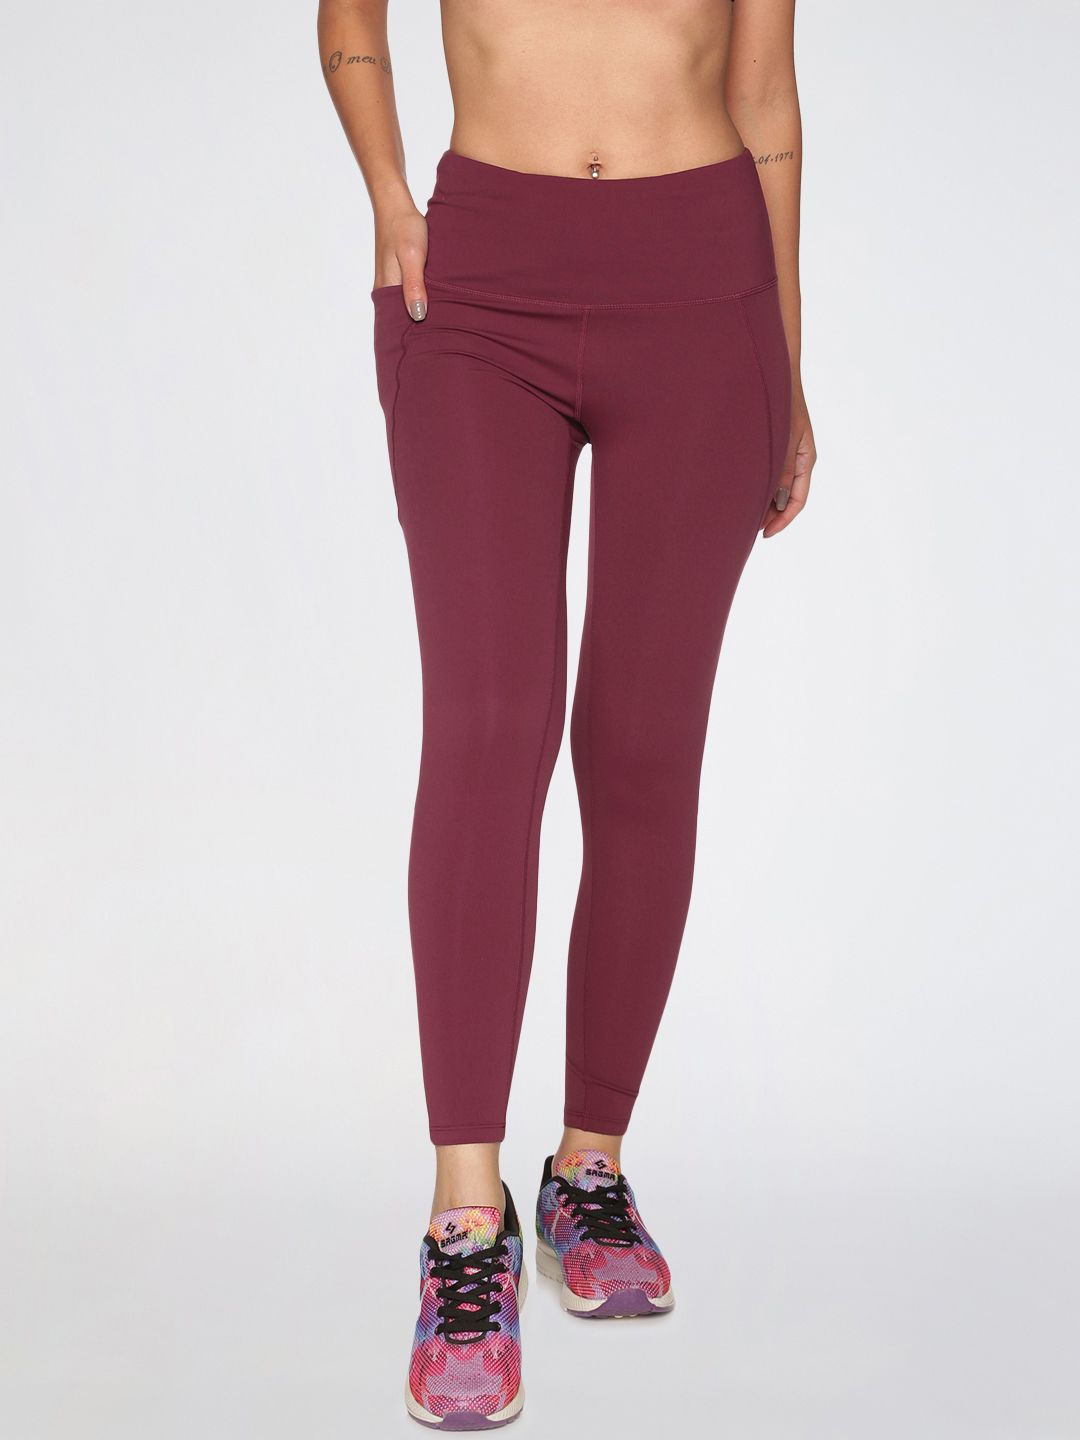 BlissClub Women Burgundy Super Stretchy & High Waisted The Ultimate Leggings Price in India